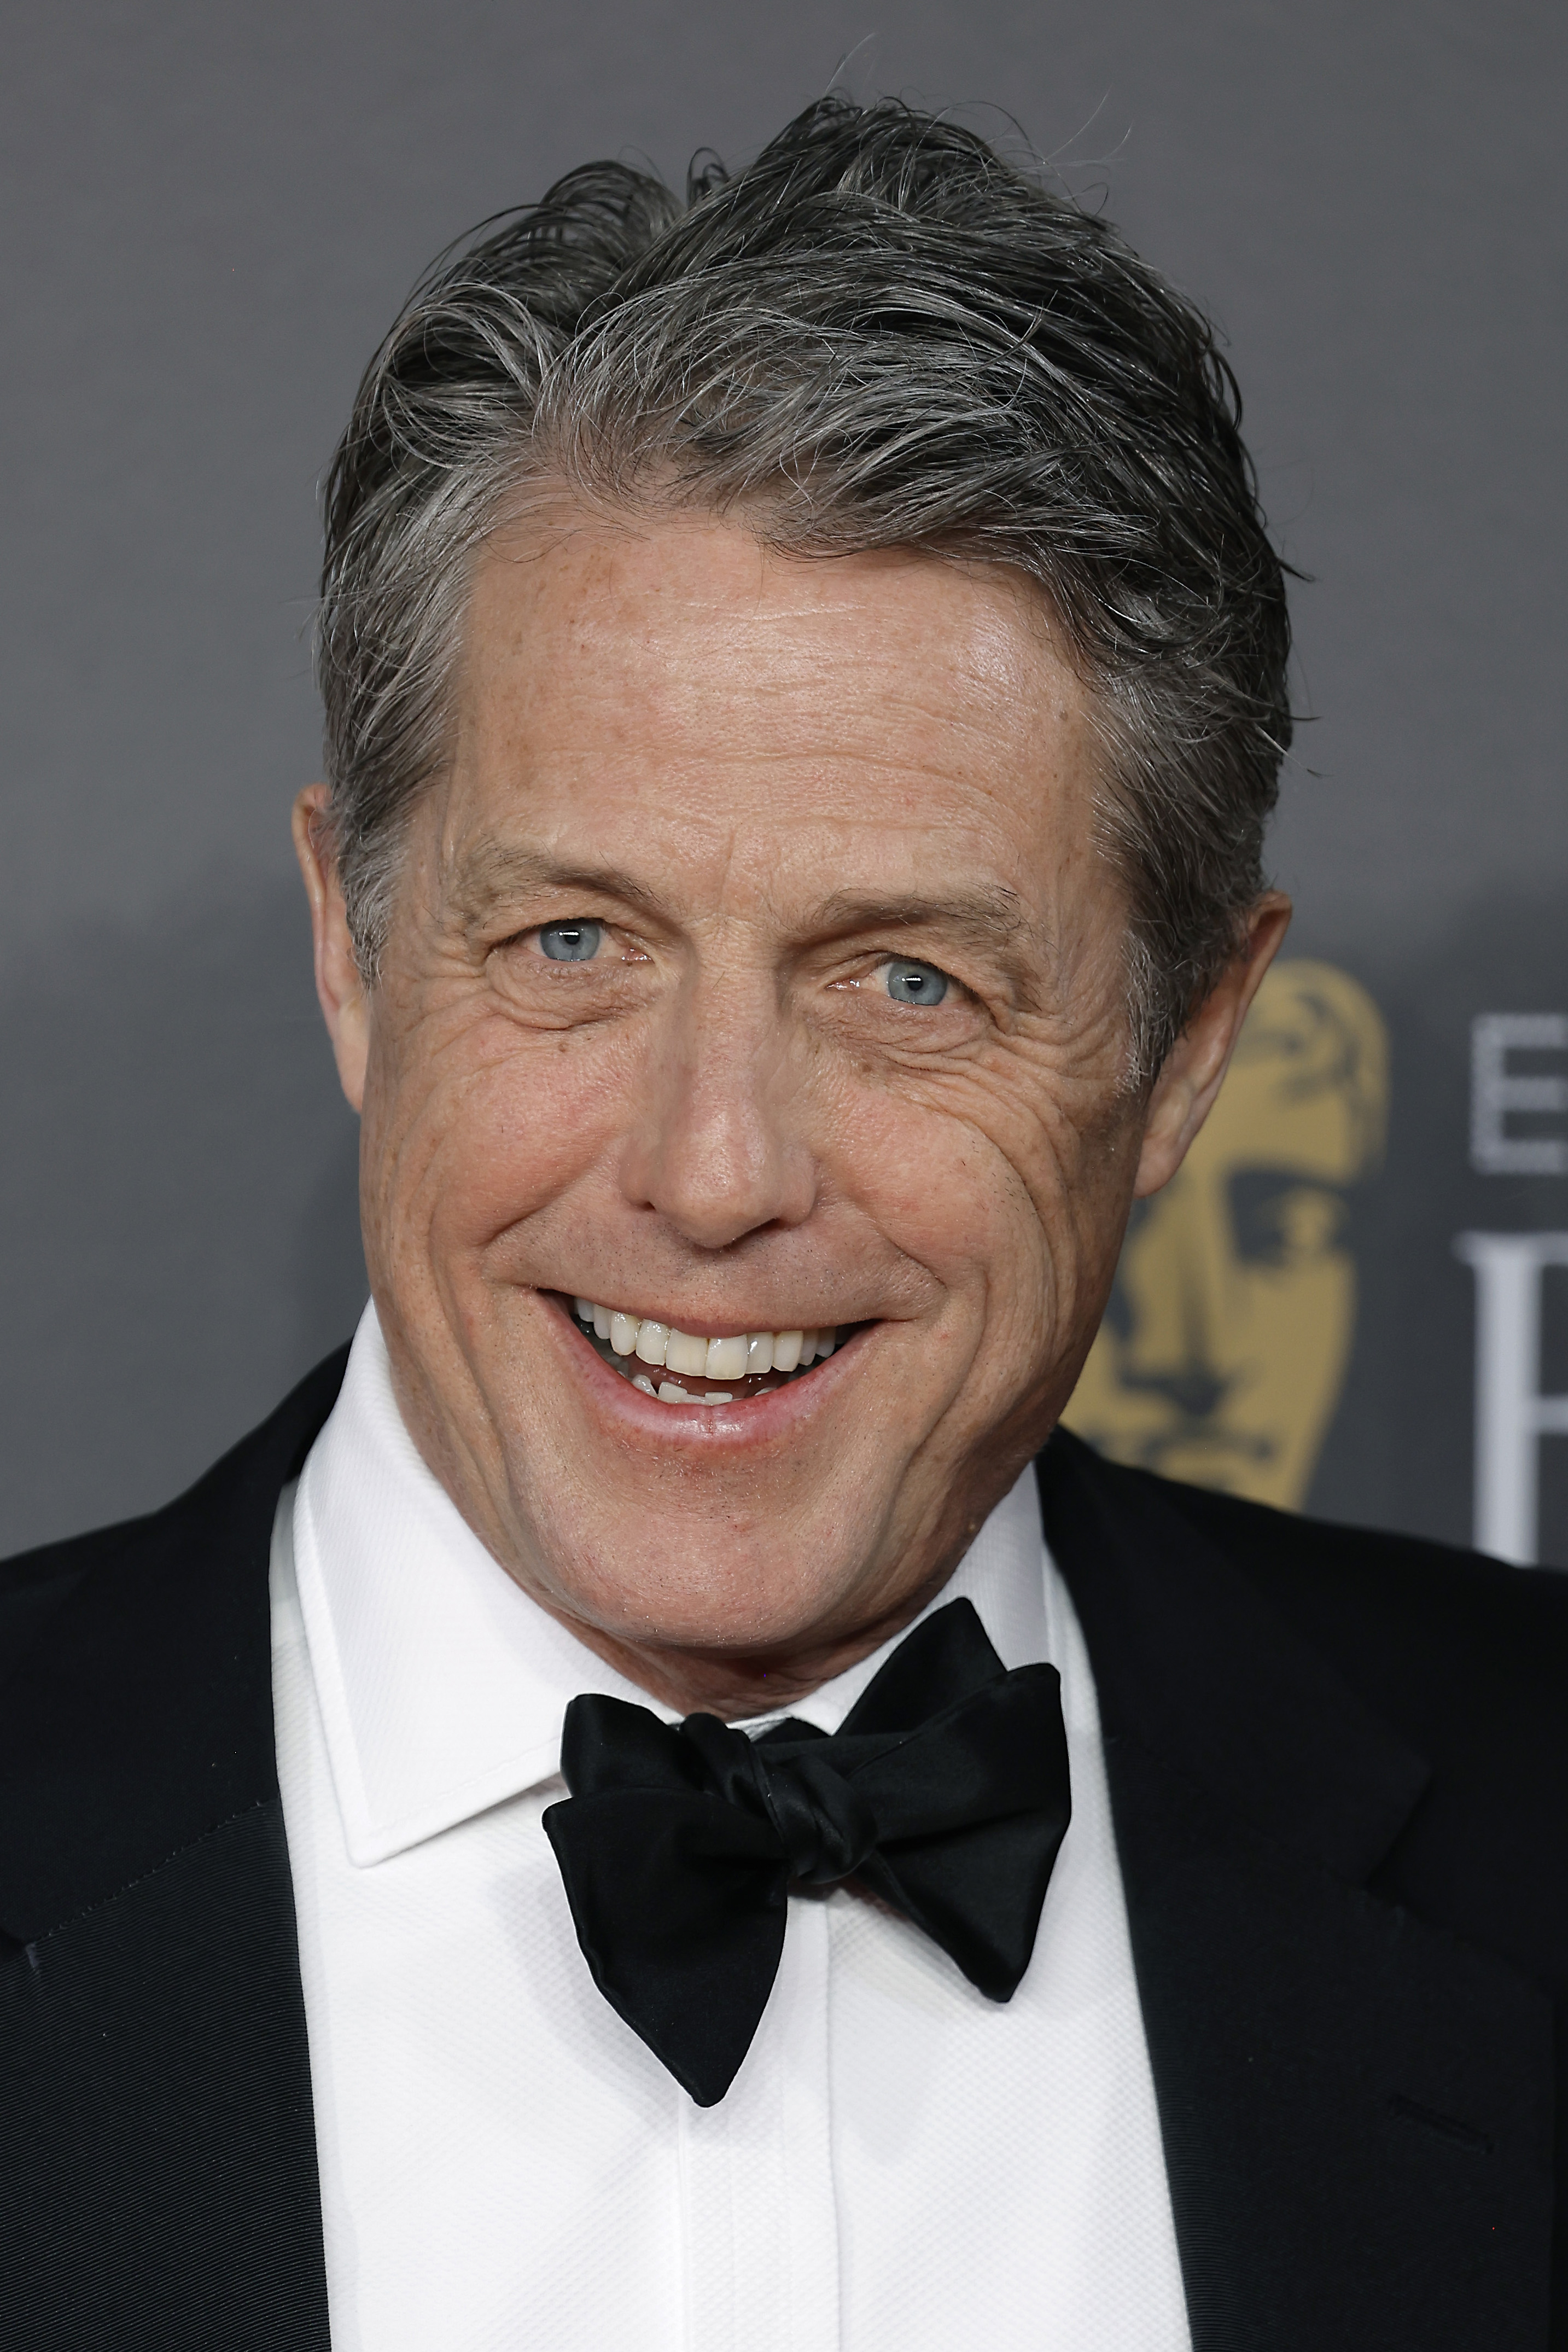 Hugh Grant smiles in a black tuxedo with a bow tie at an event